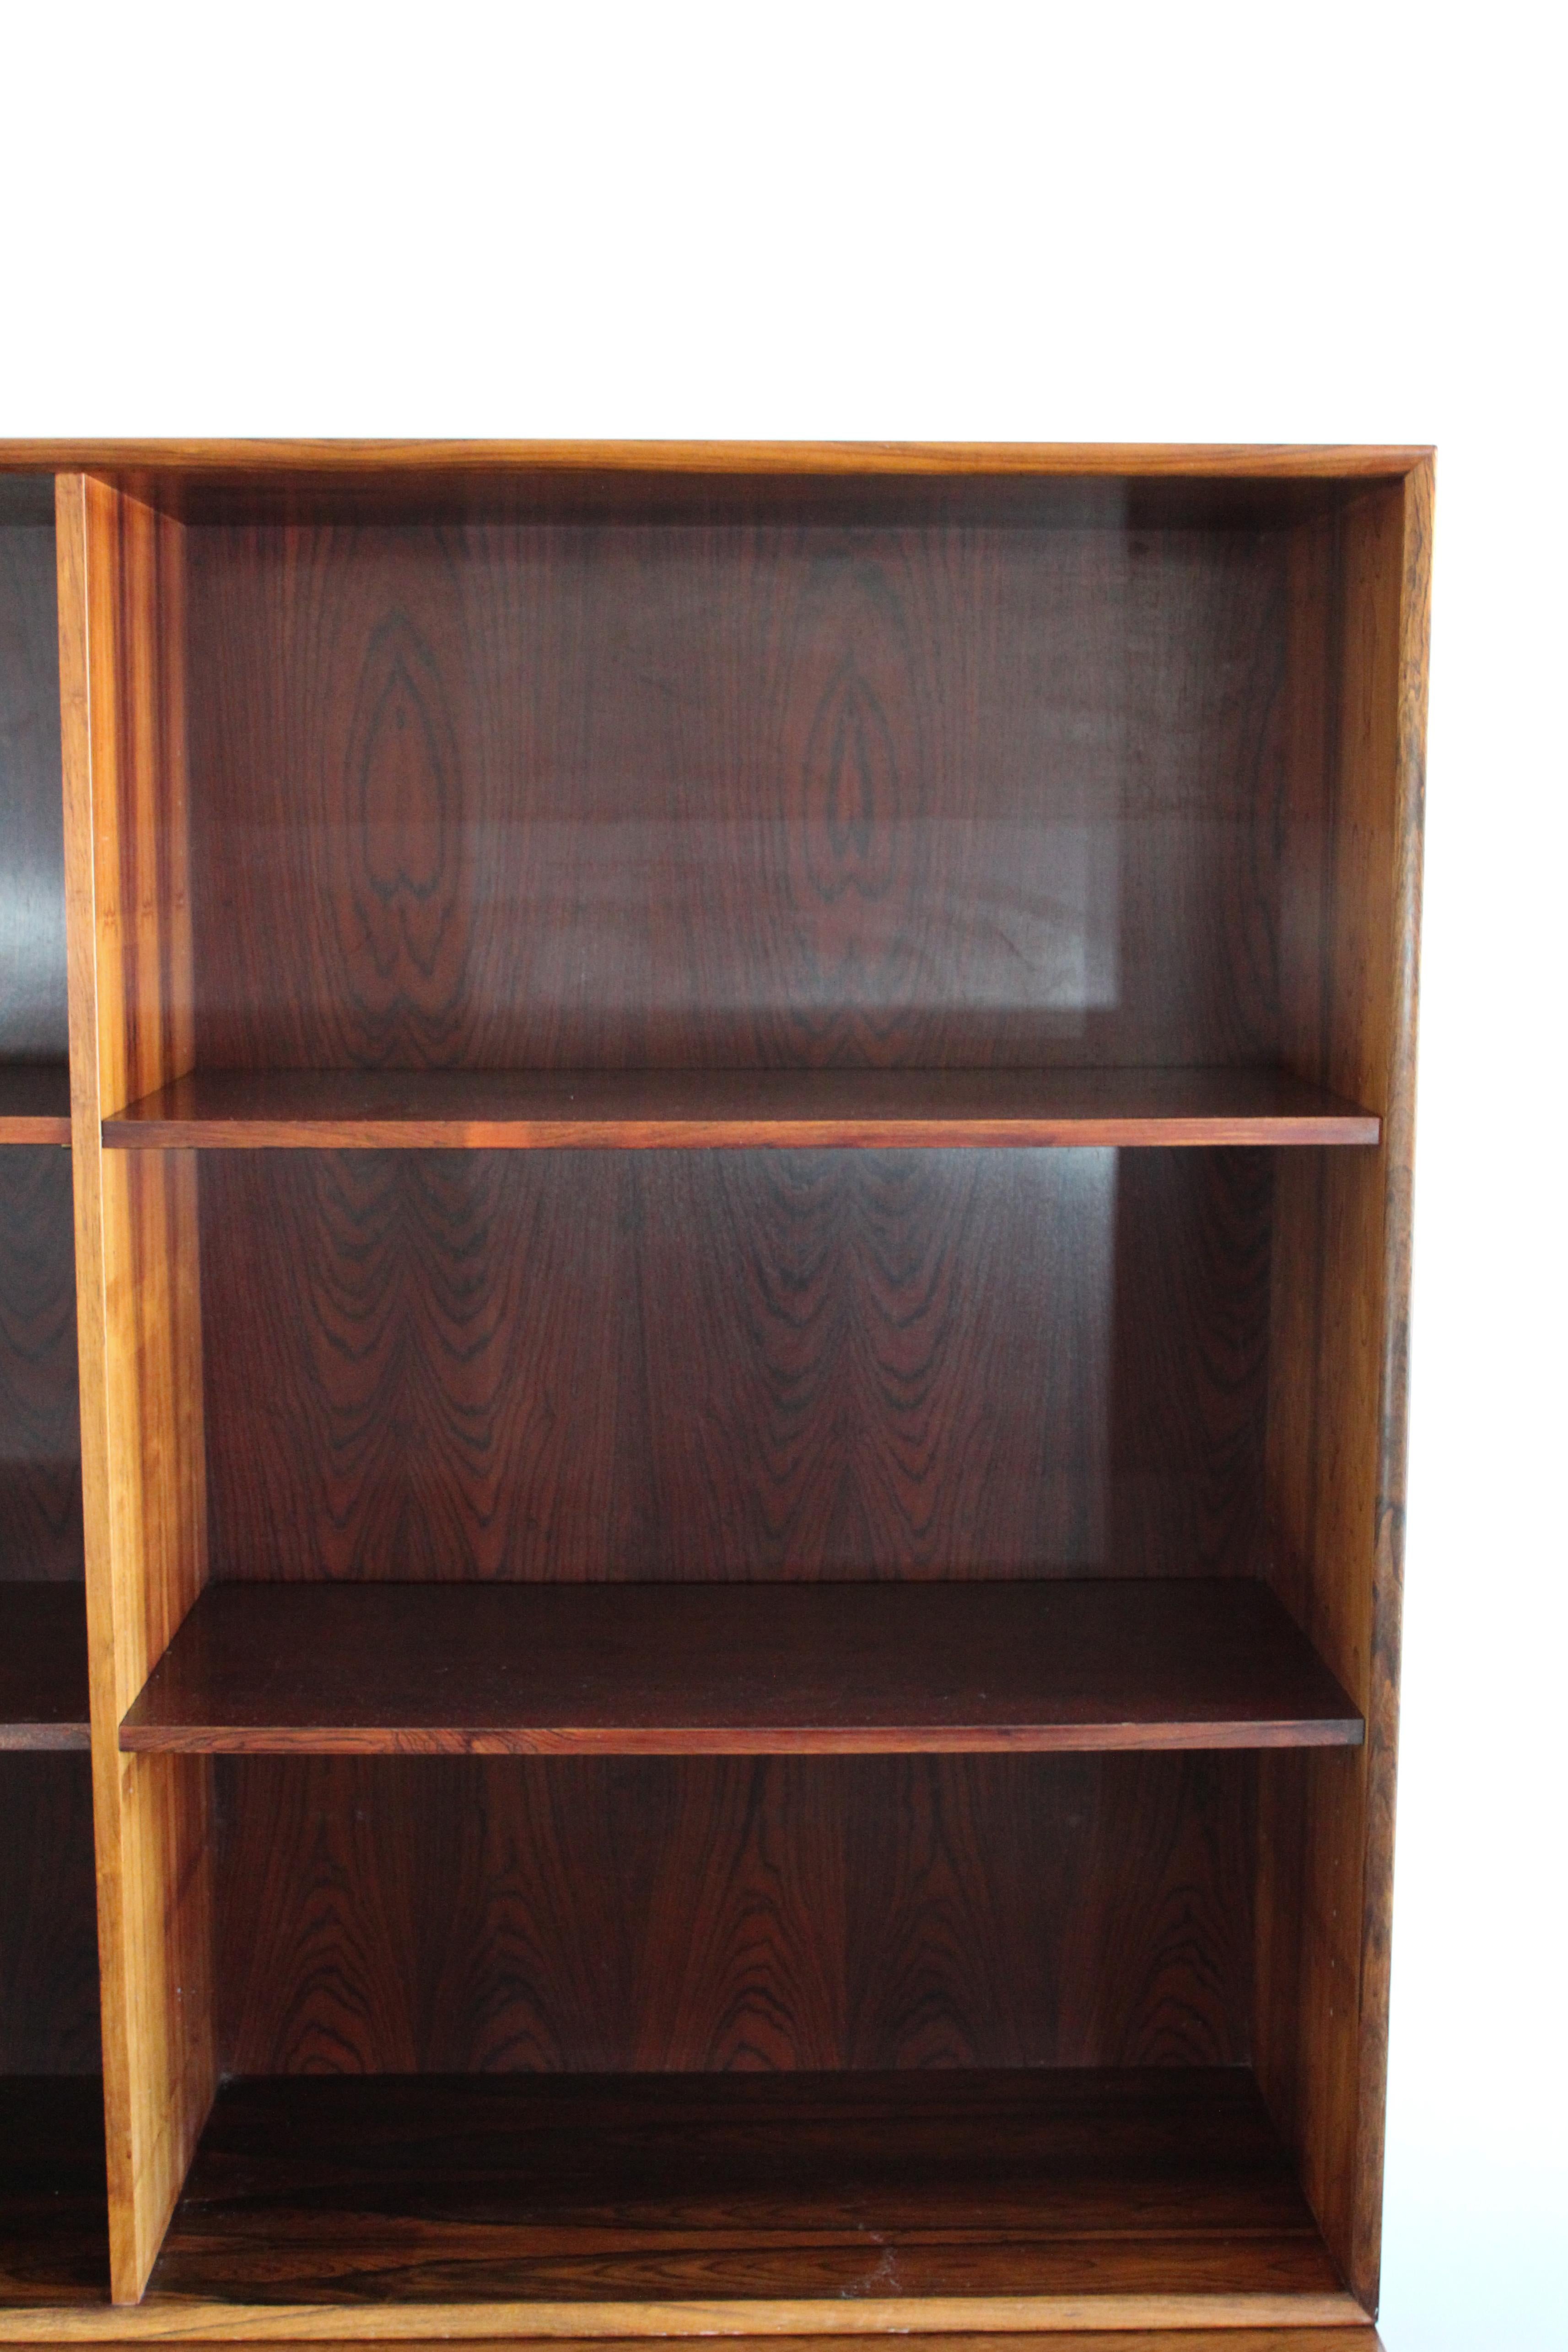 Midcentury Rosewood Arne Vodder Book Case with Tambour Doors by Sibast, 1950s For Sale 12